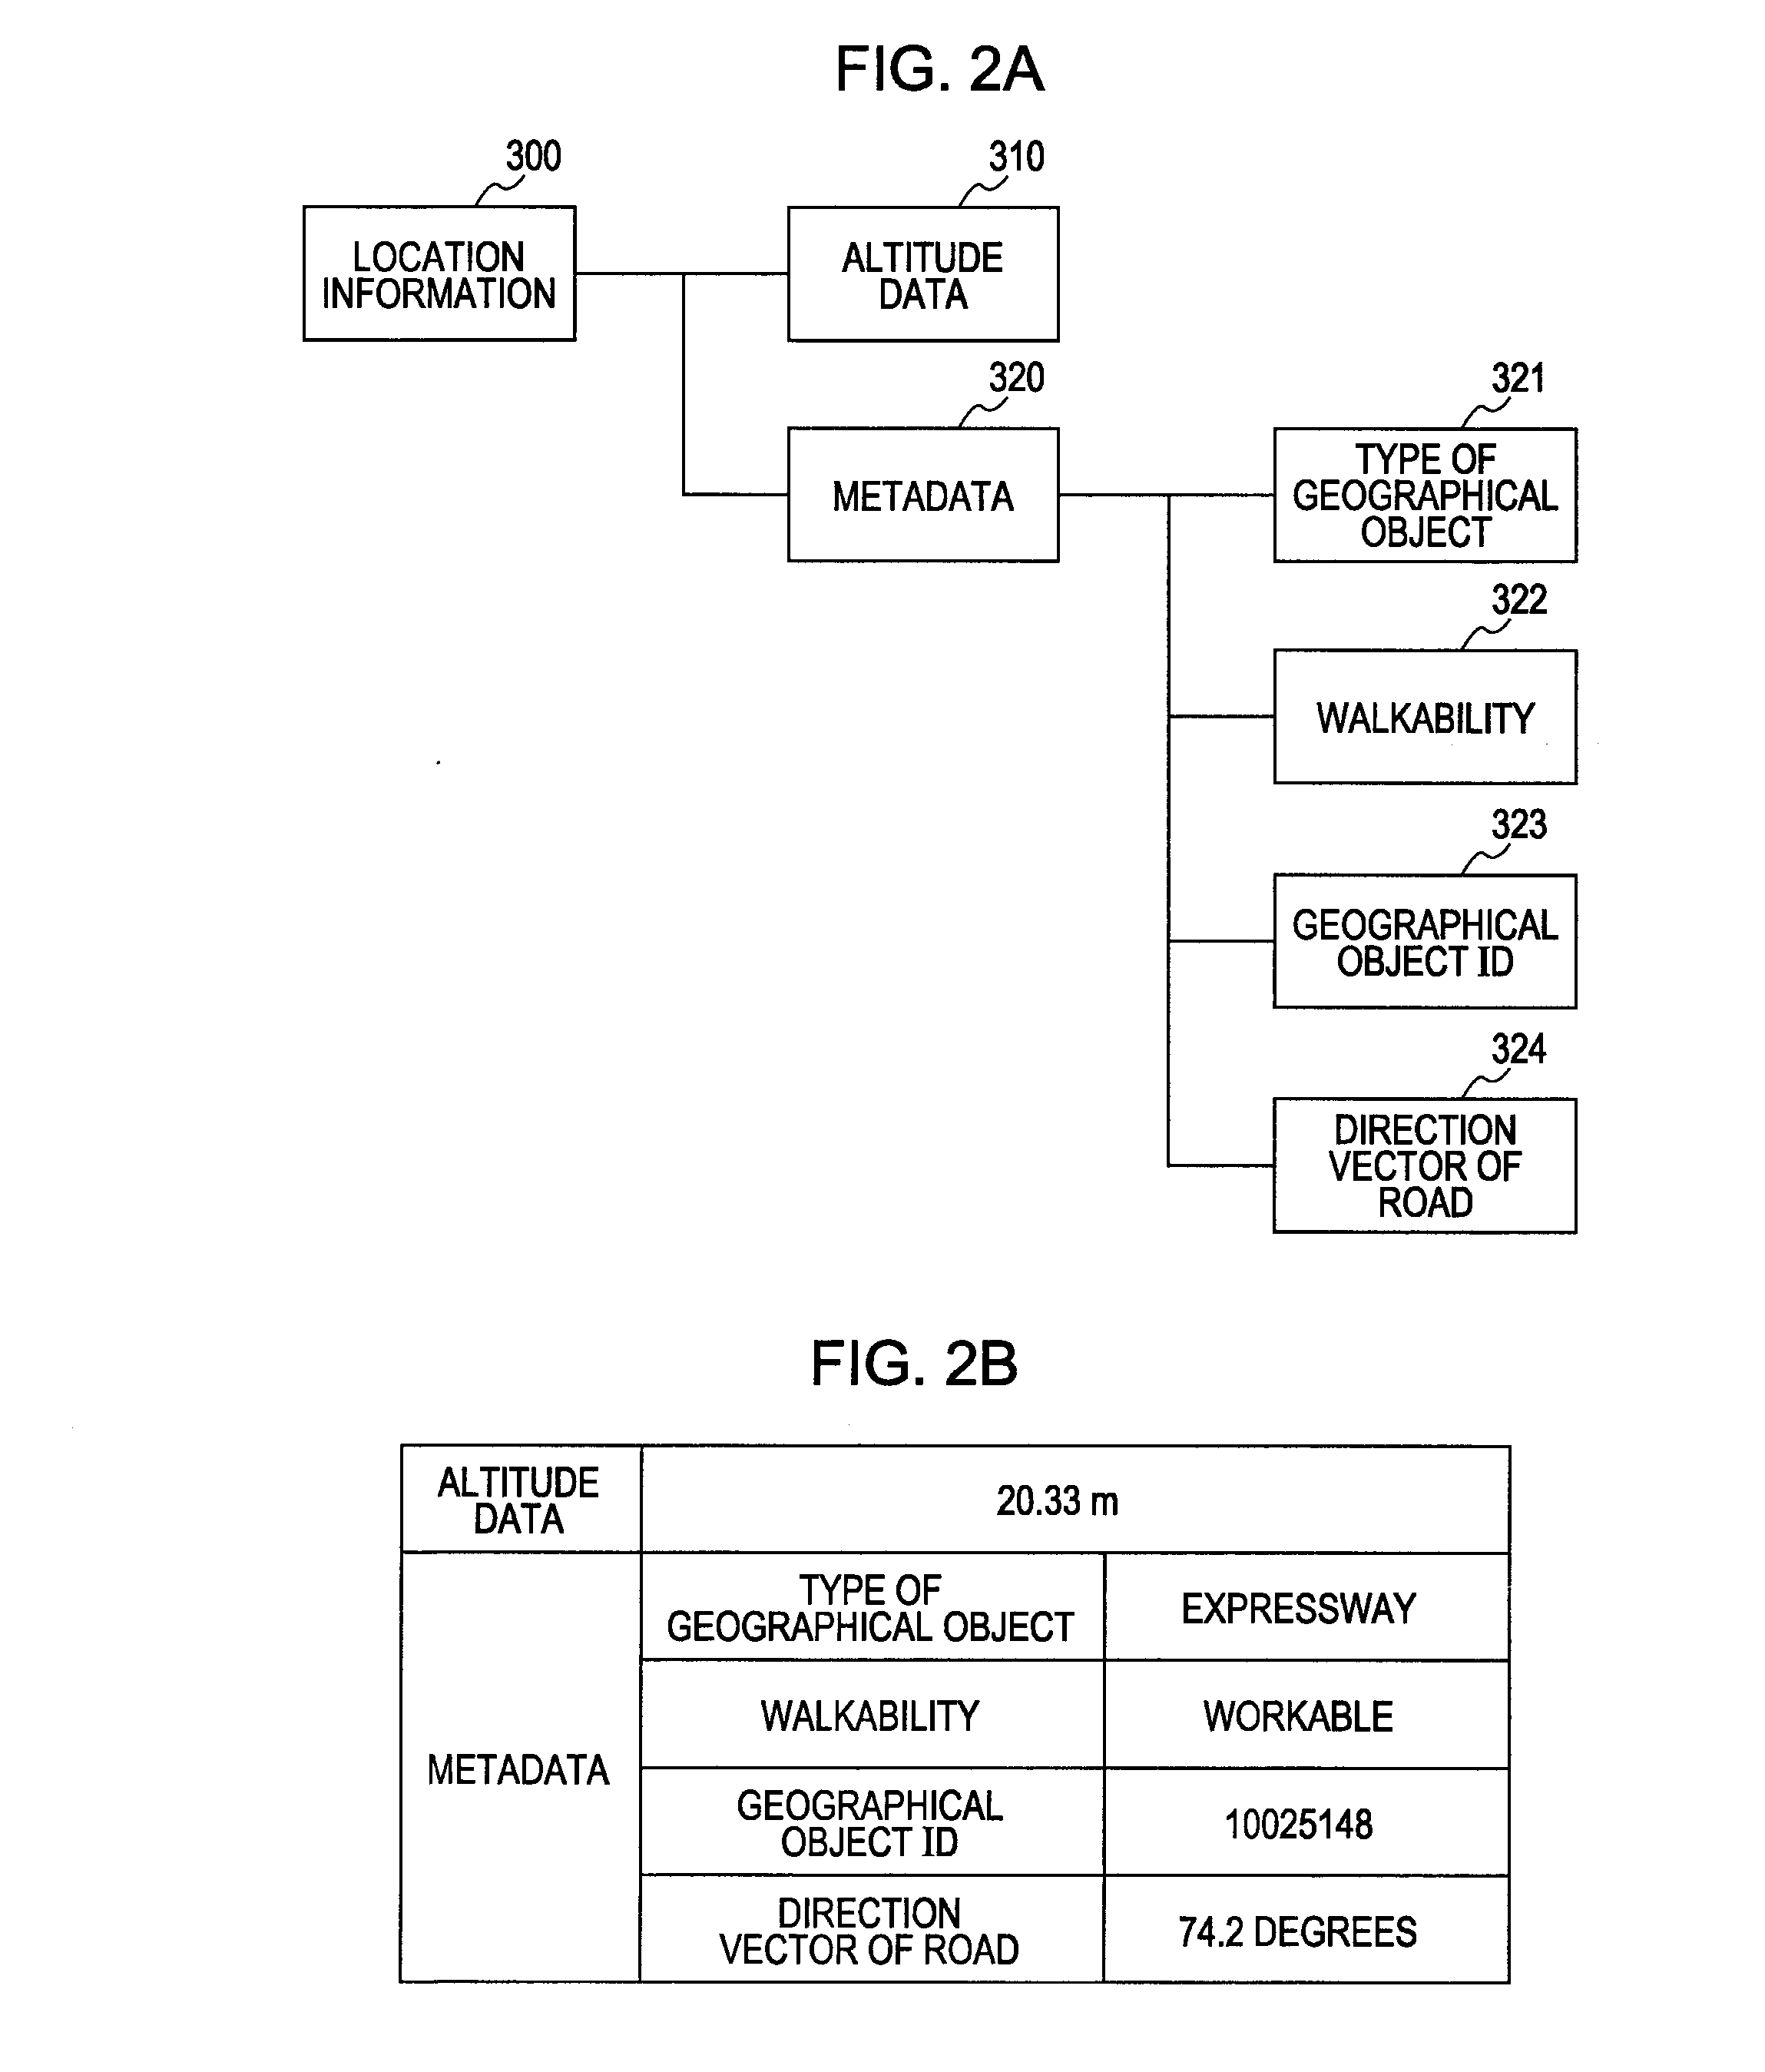 System and Apparatus for Processing Information, Image Display Apparatus, Control Method and Computer Program